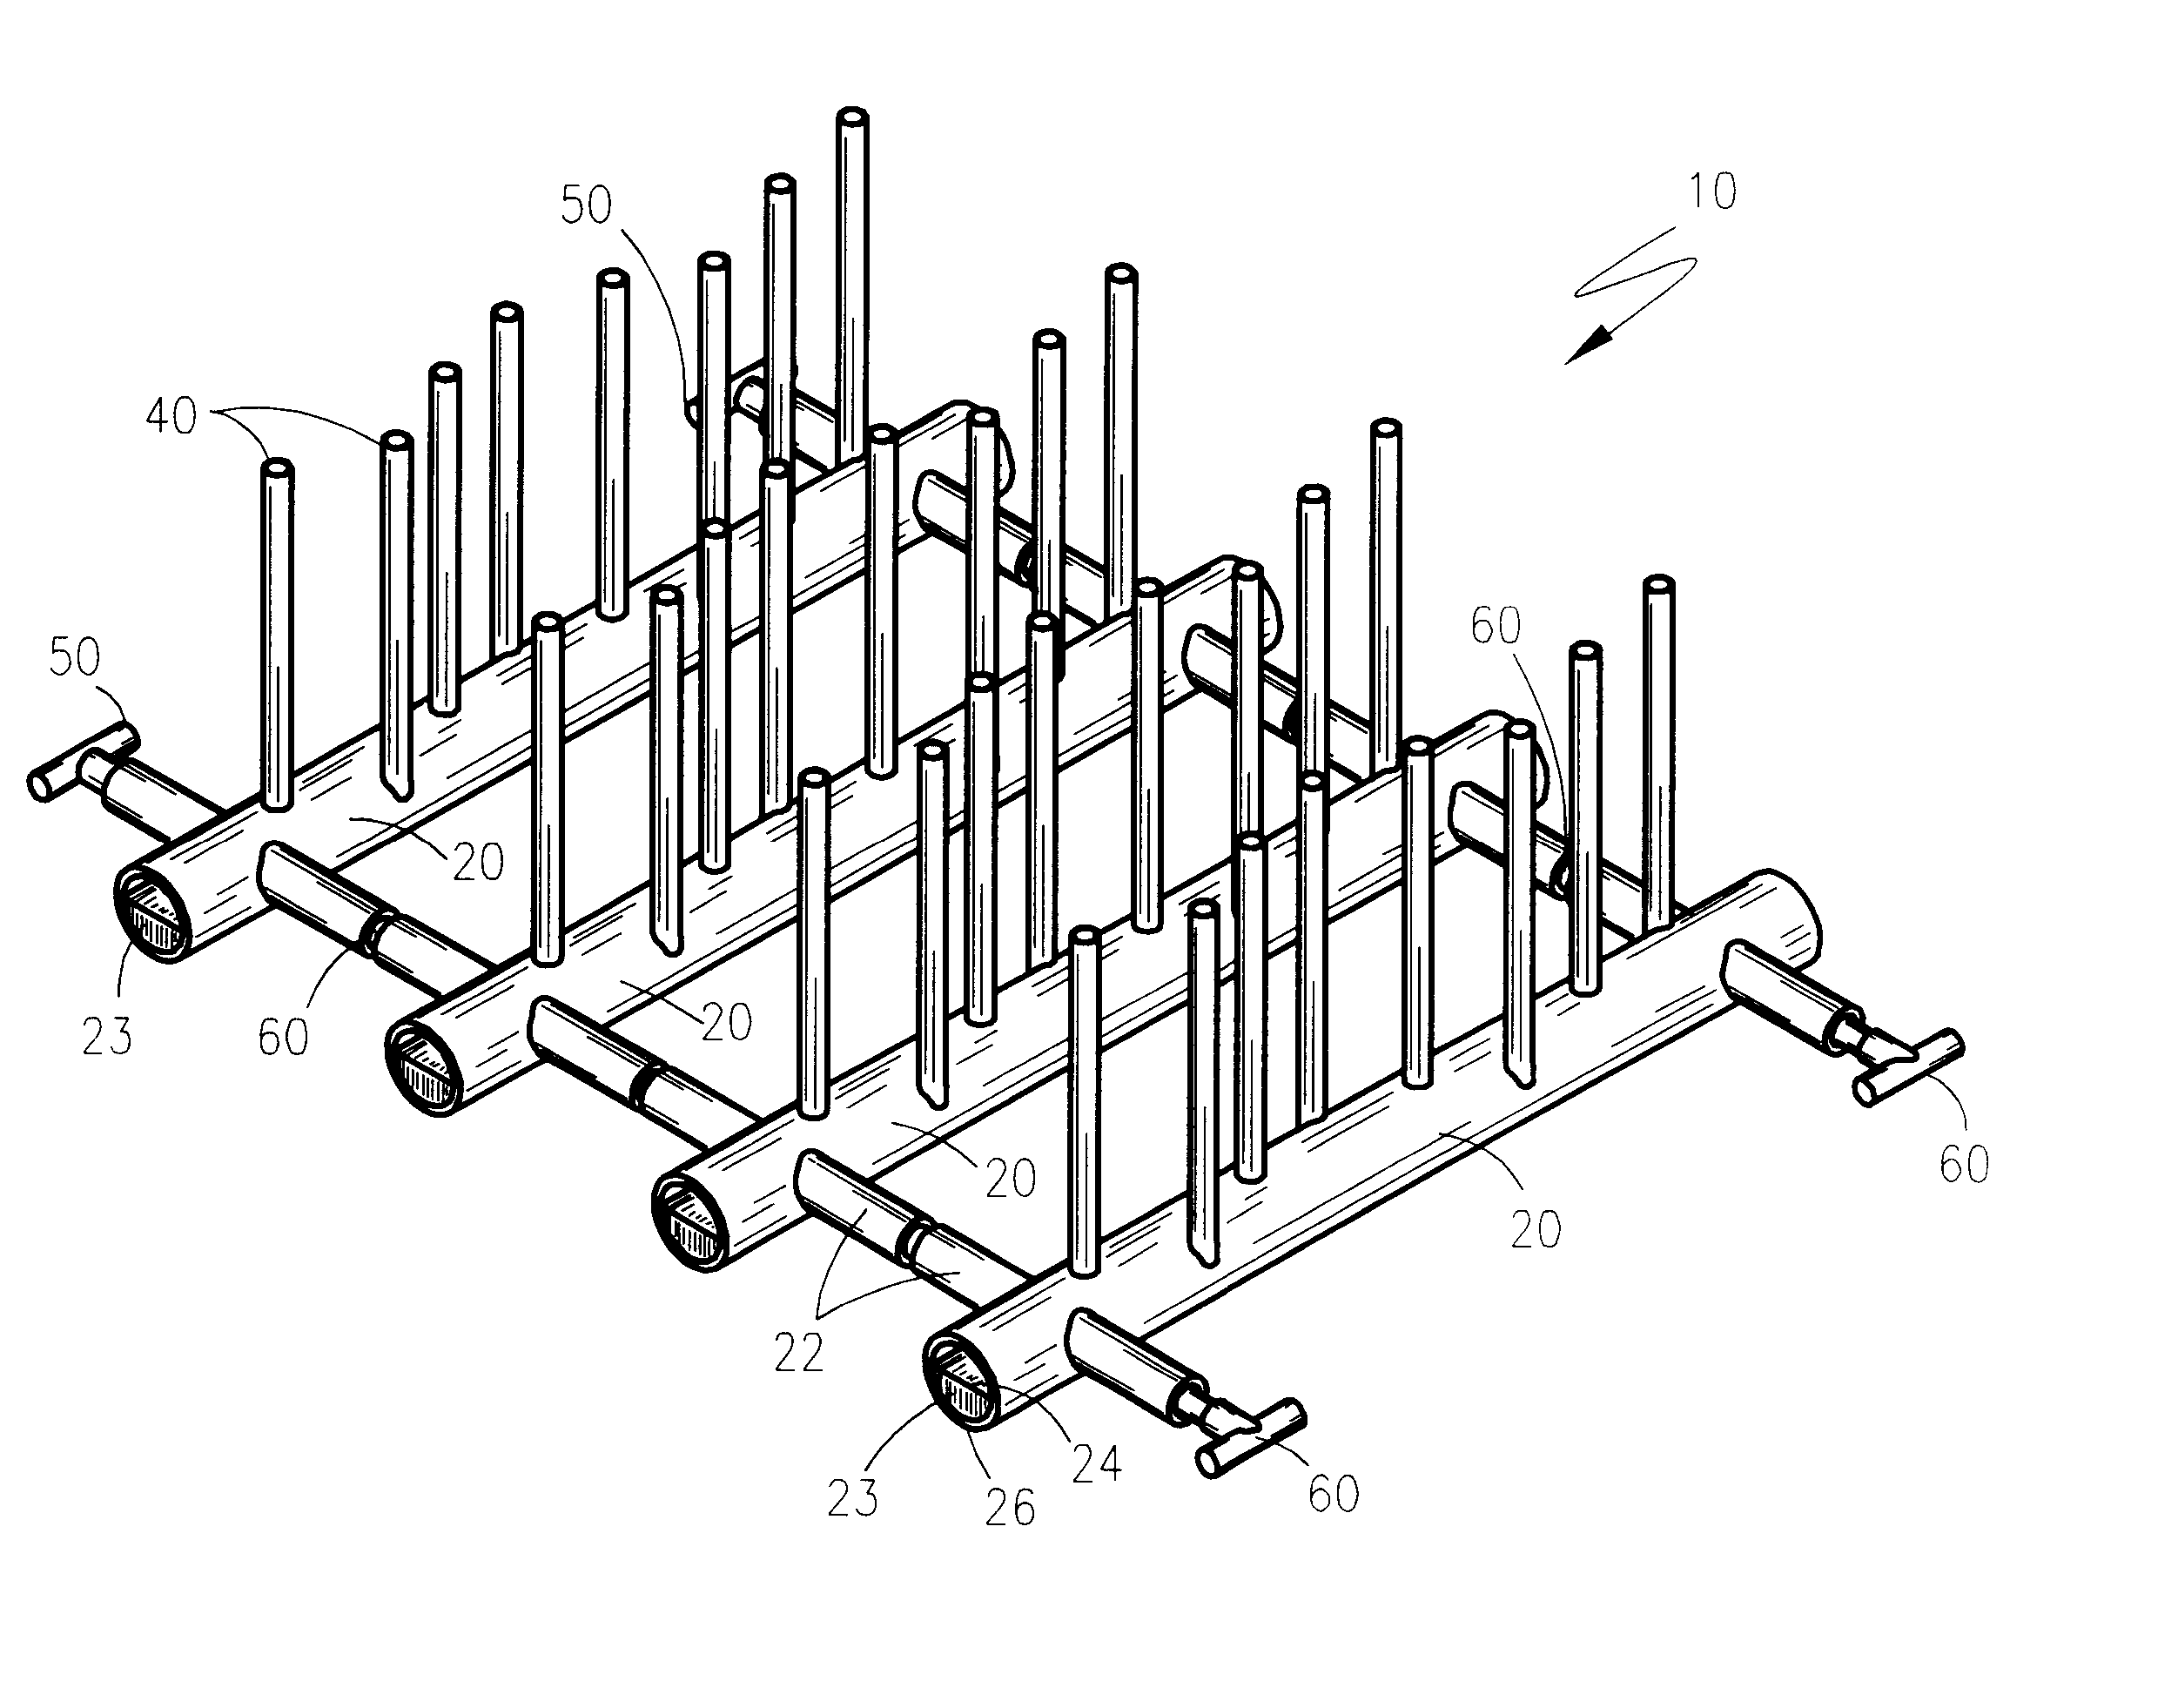 Reticulated fish aggregation apparatus